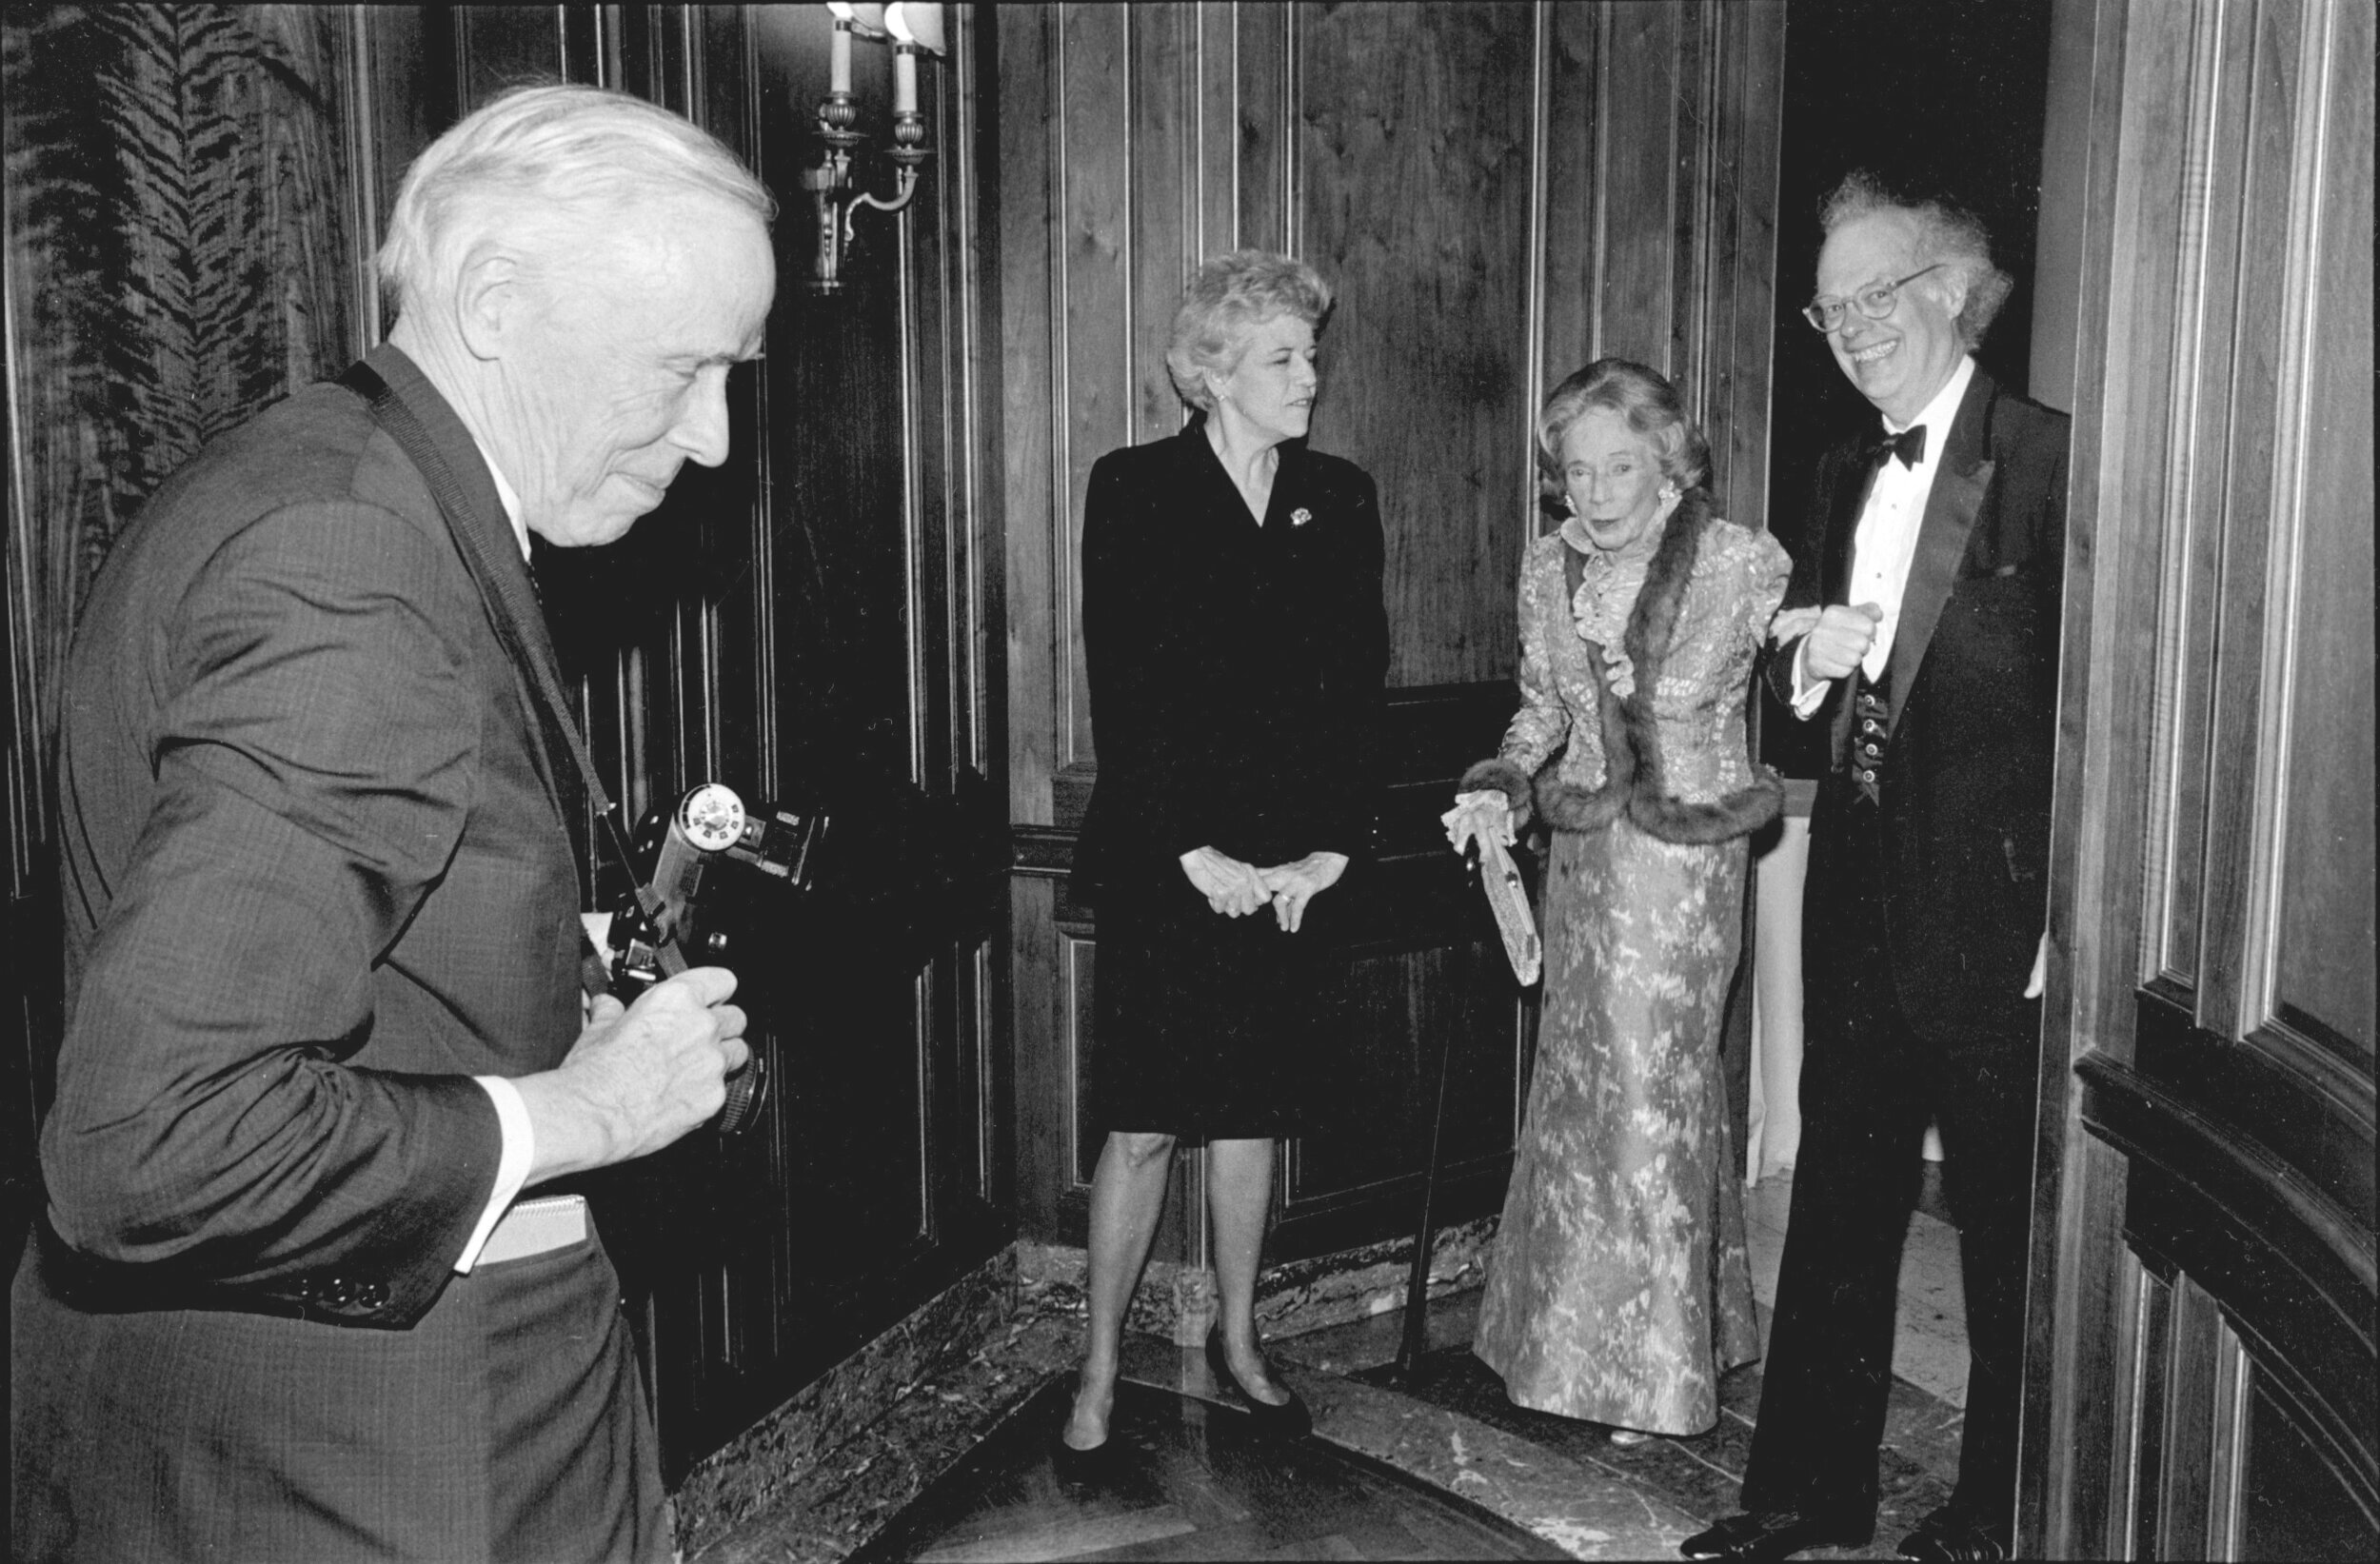  Bill Cunningham and Brooke Astor at the Frick. 